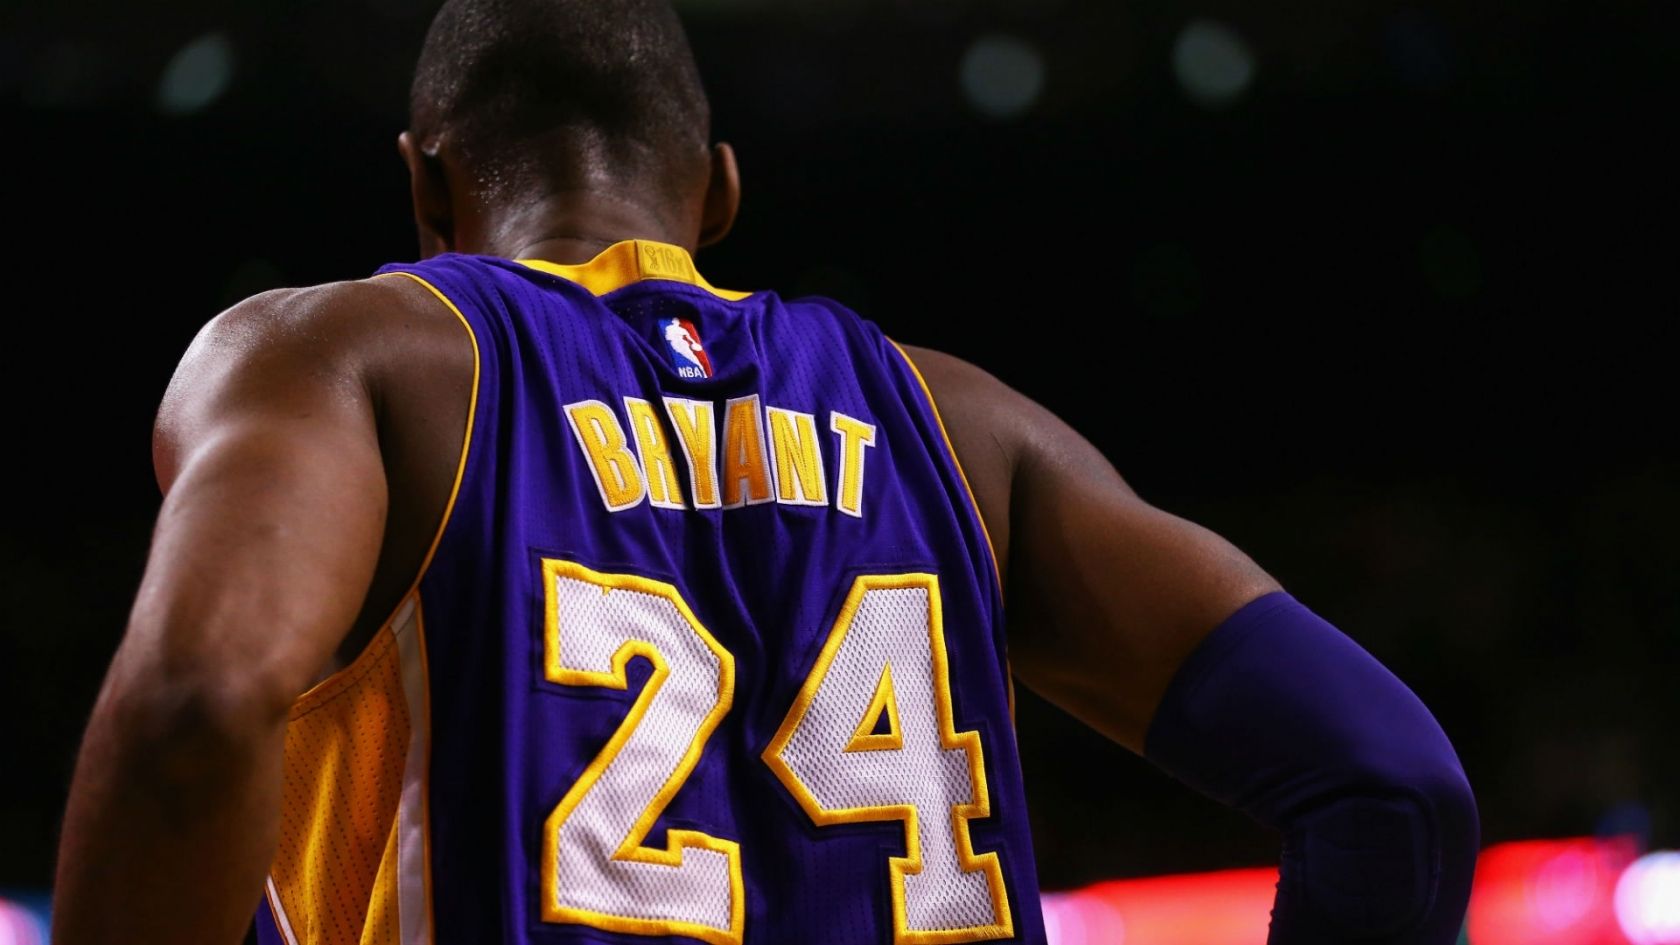 Lakers fans can celebrate 'Kobe Bryant Day' with a new Nike jersey 